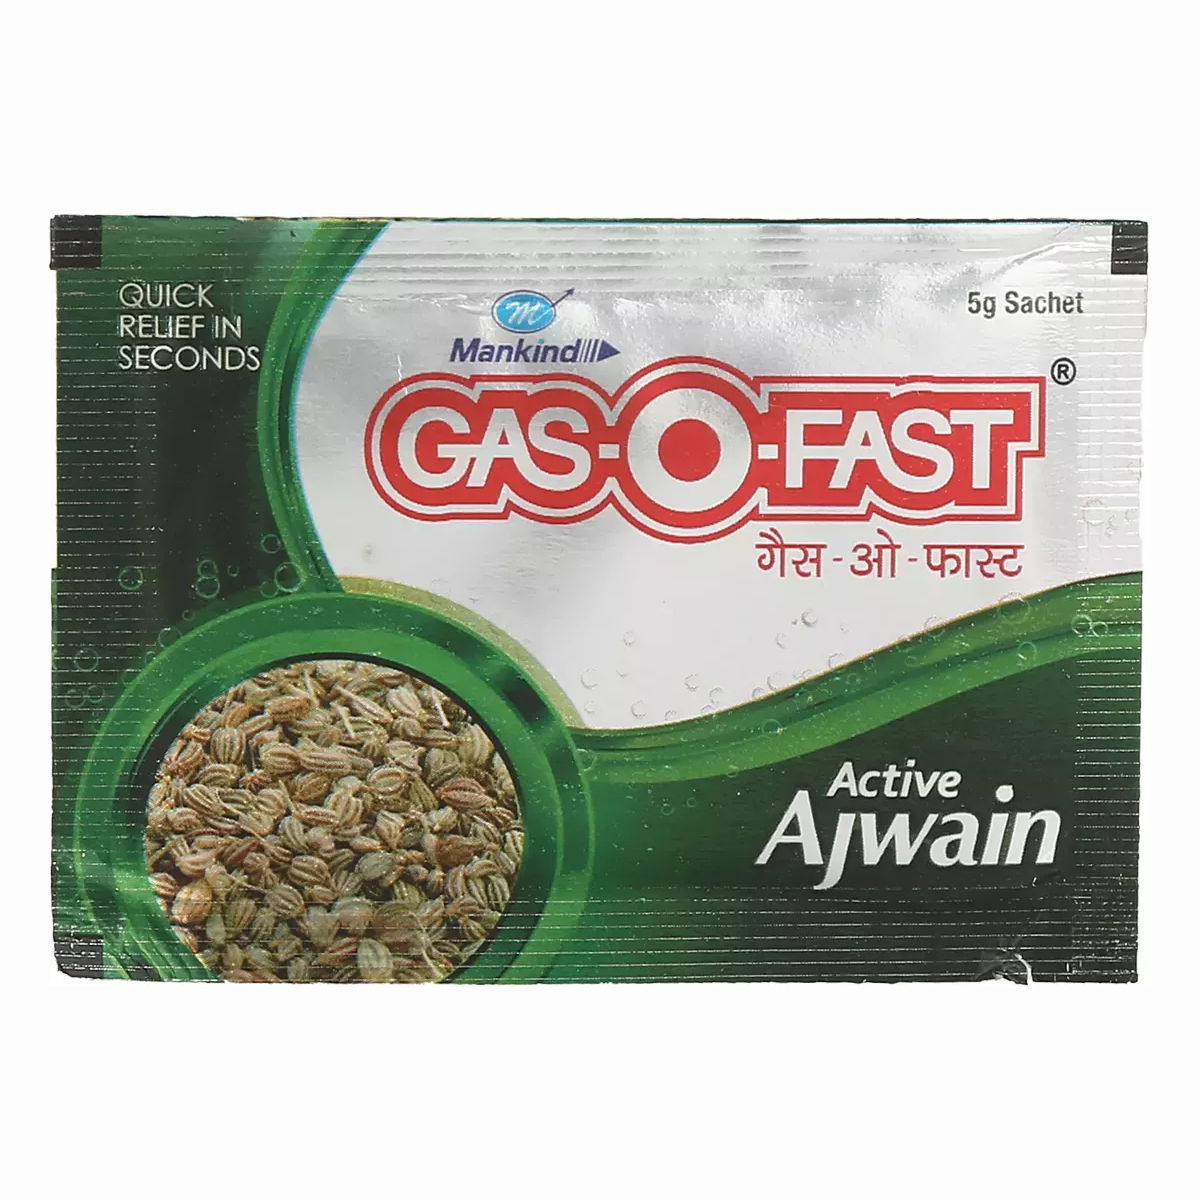 Gas-O-Fast Active Ajwain Sachet, 5 gm, Pack of 1 